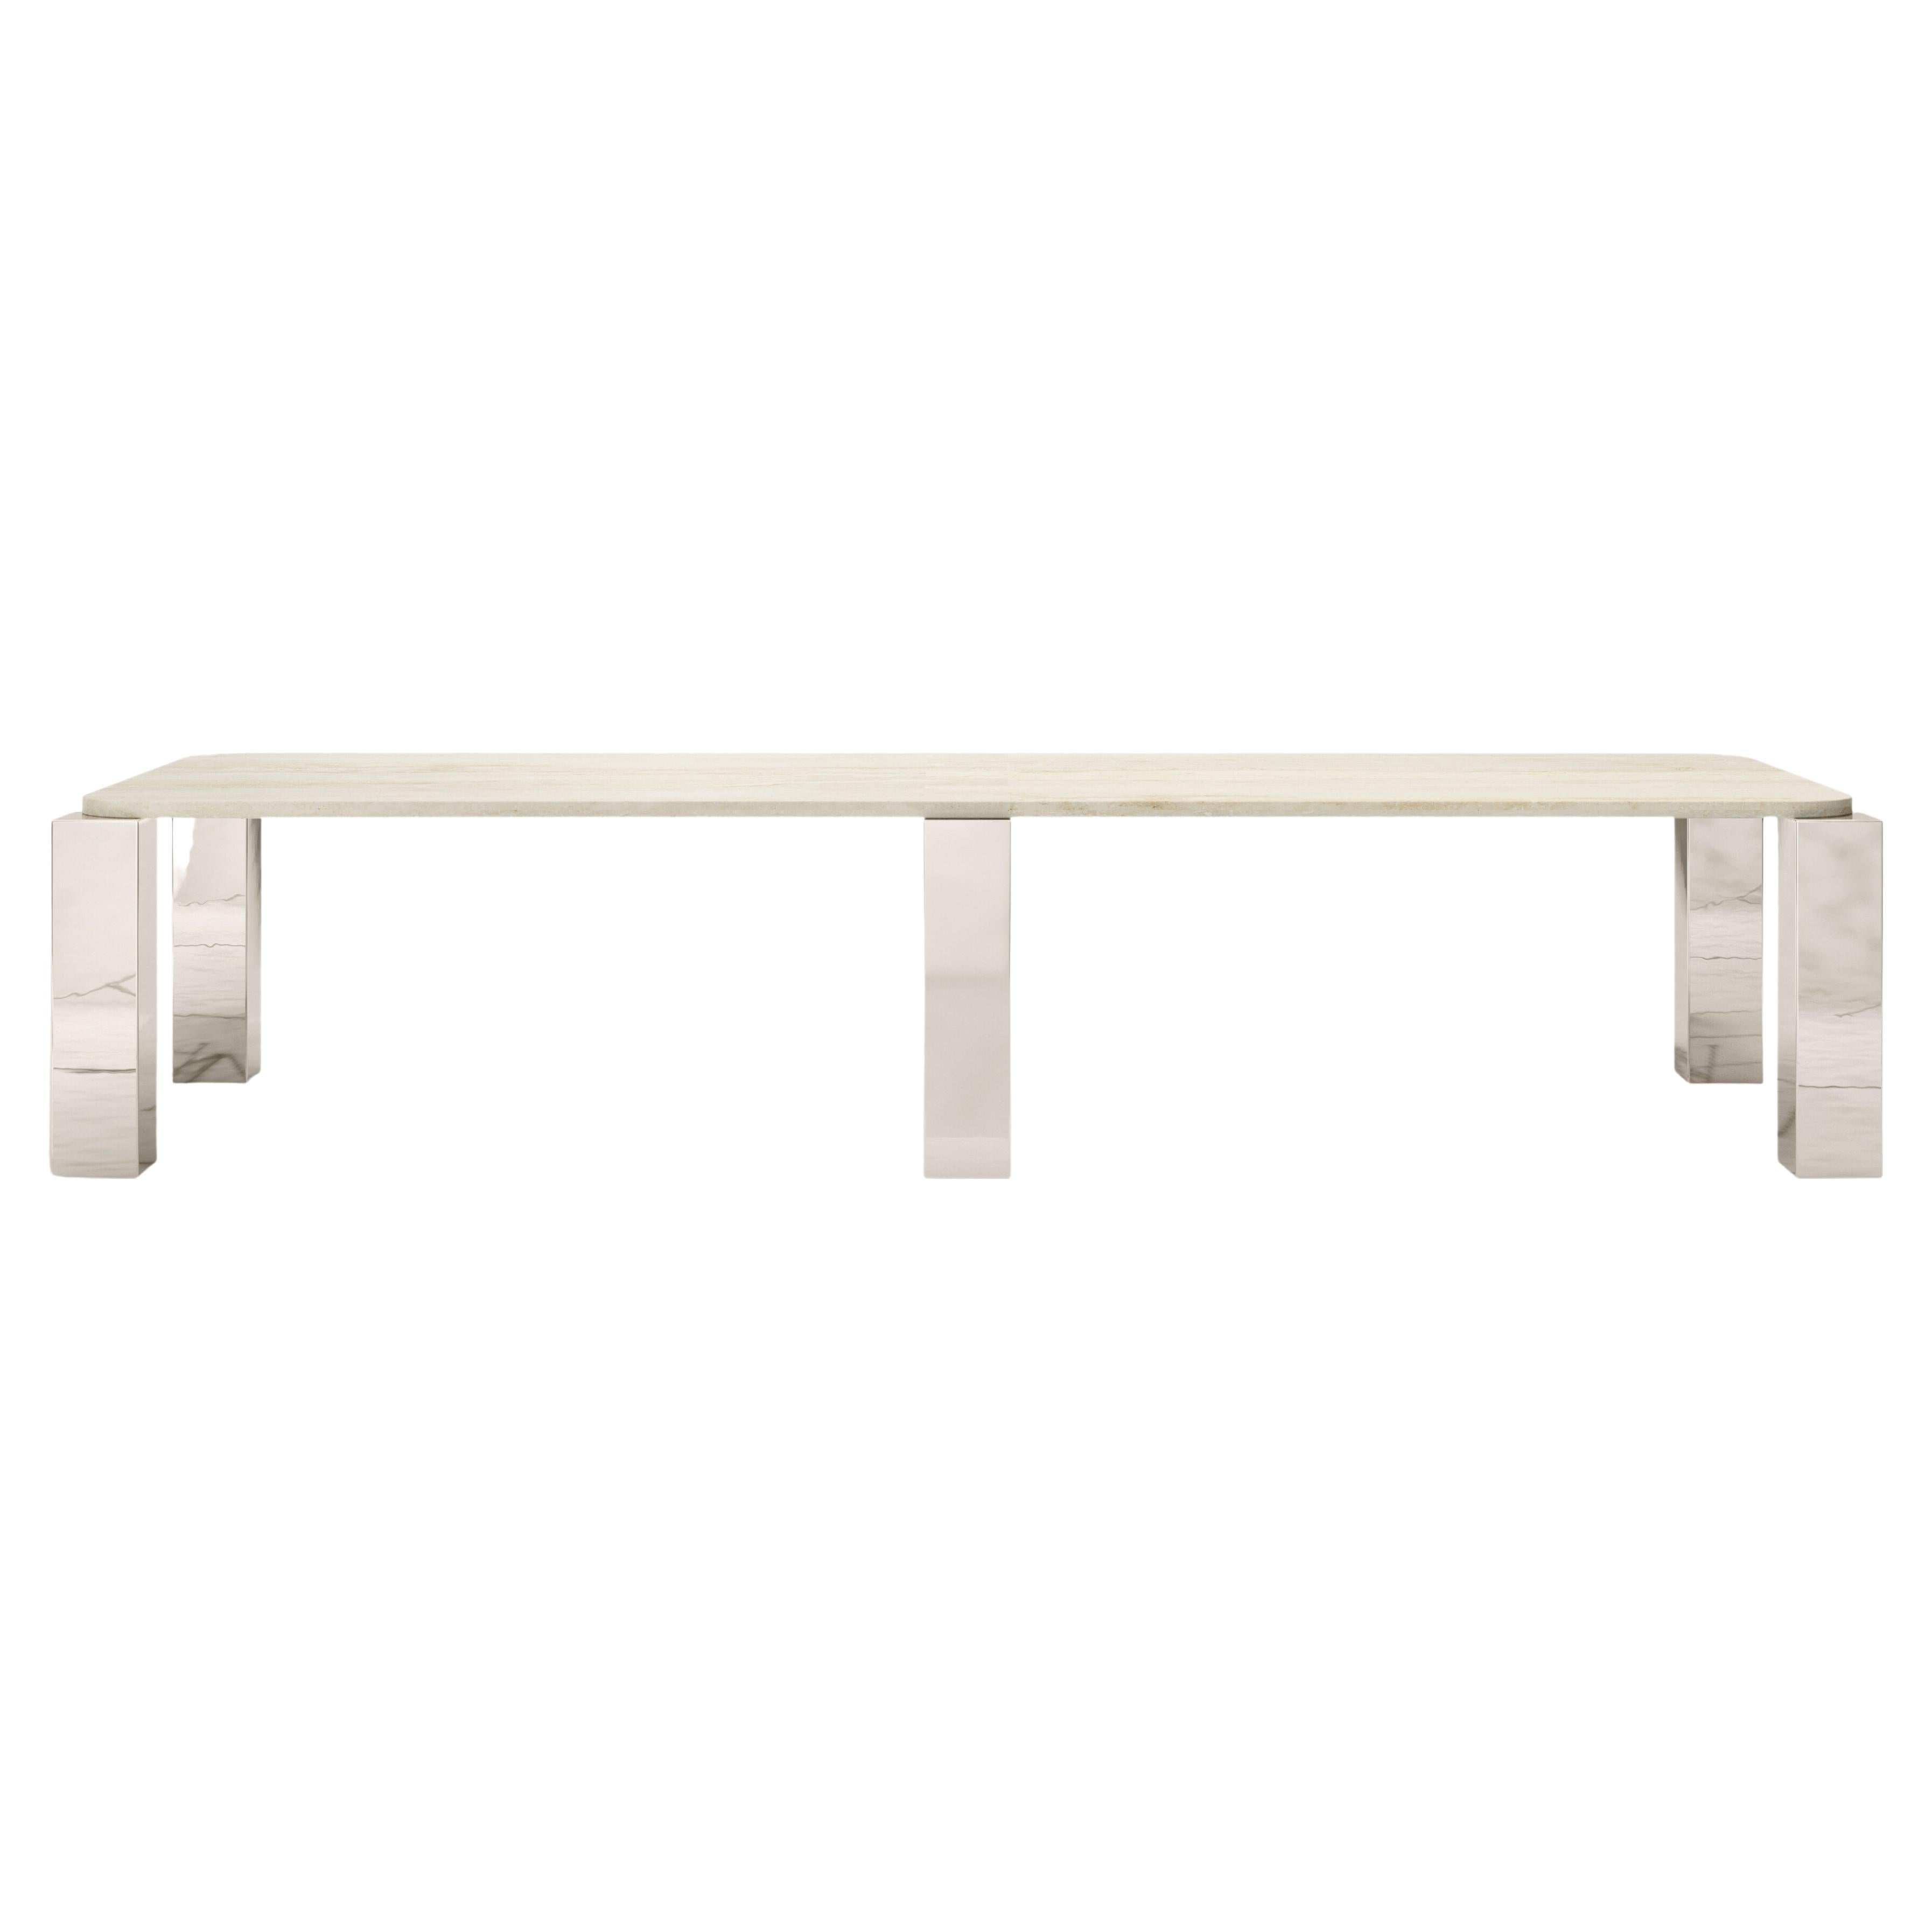 FORM(LA) Cubo Rectangle Dining Table 146”L x 50”W x 30”H Travertino & Chrome For Sale